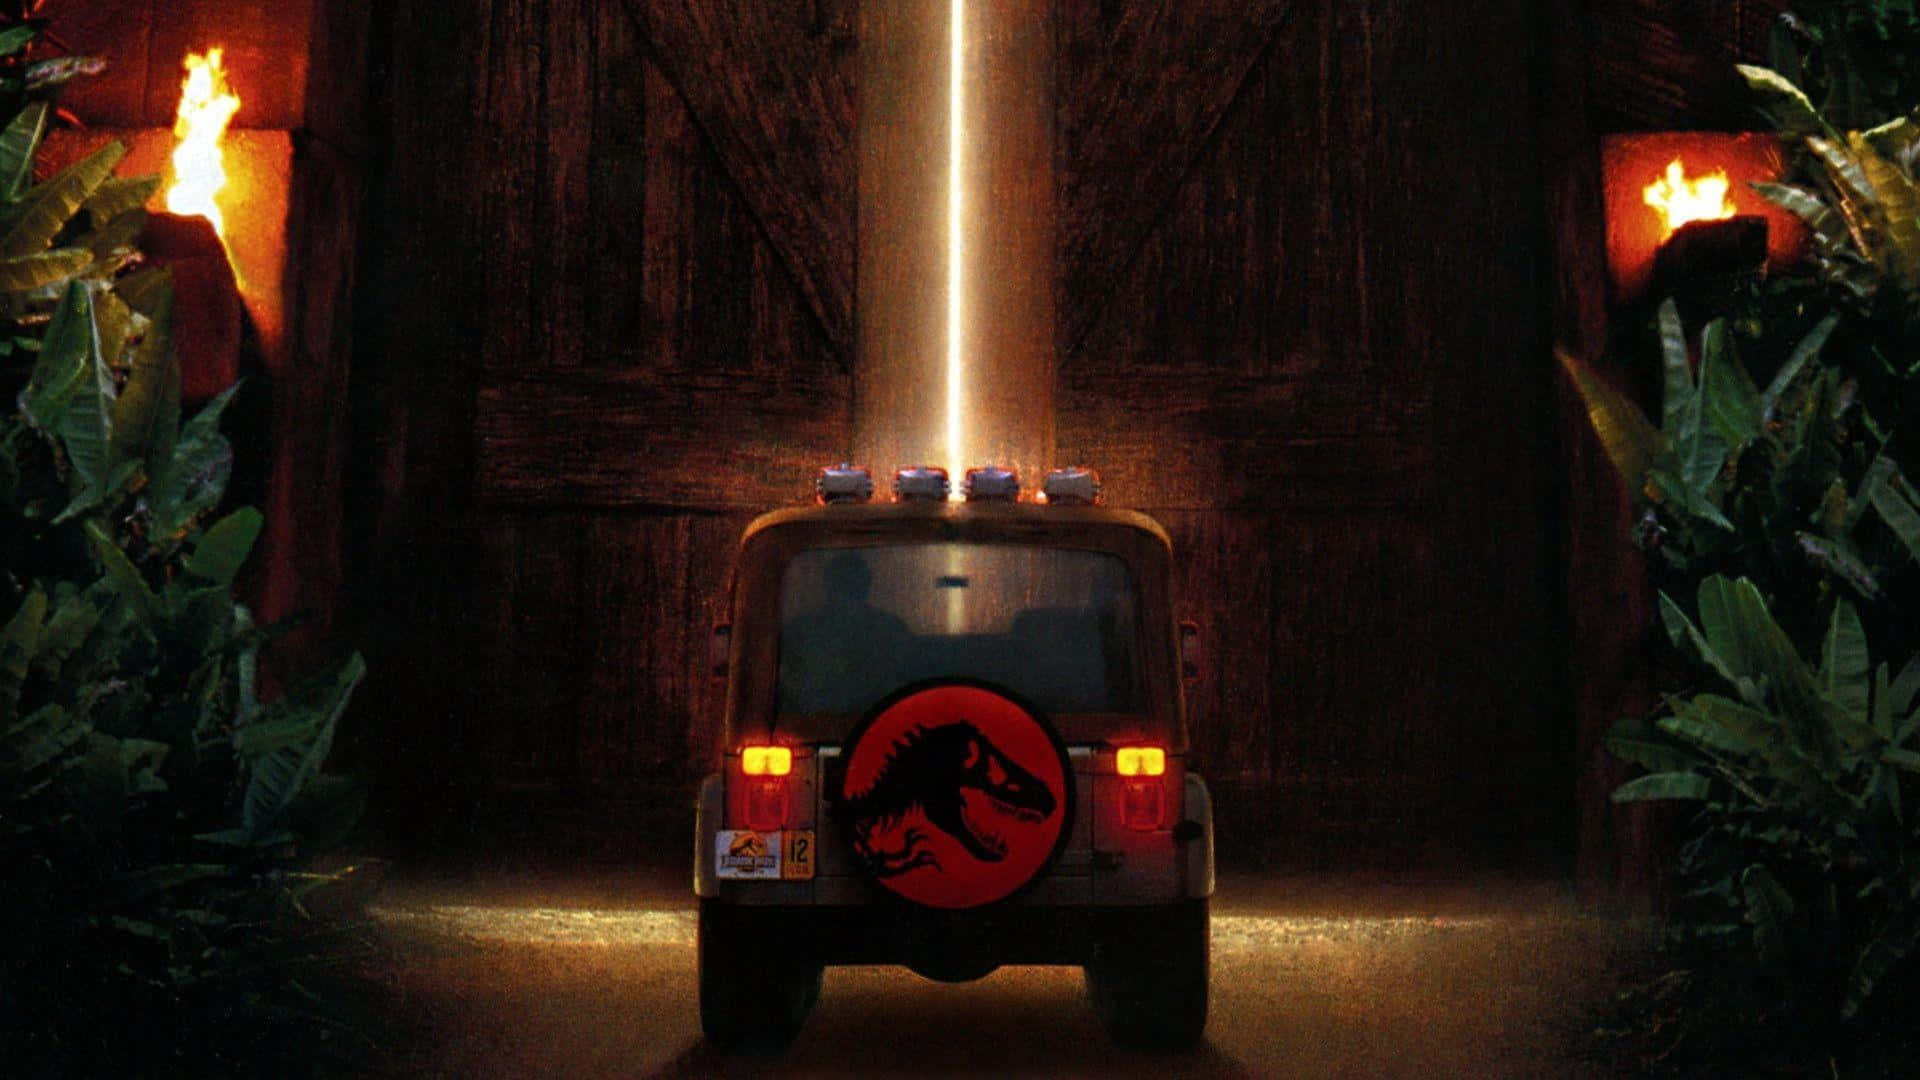 "Discover the Lost Land of Jurassic Park"